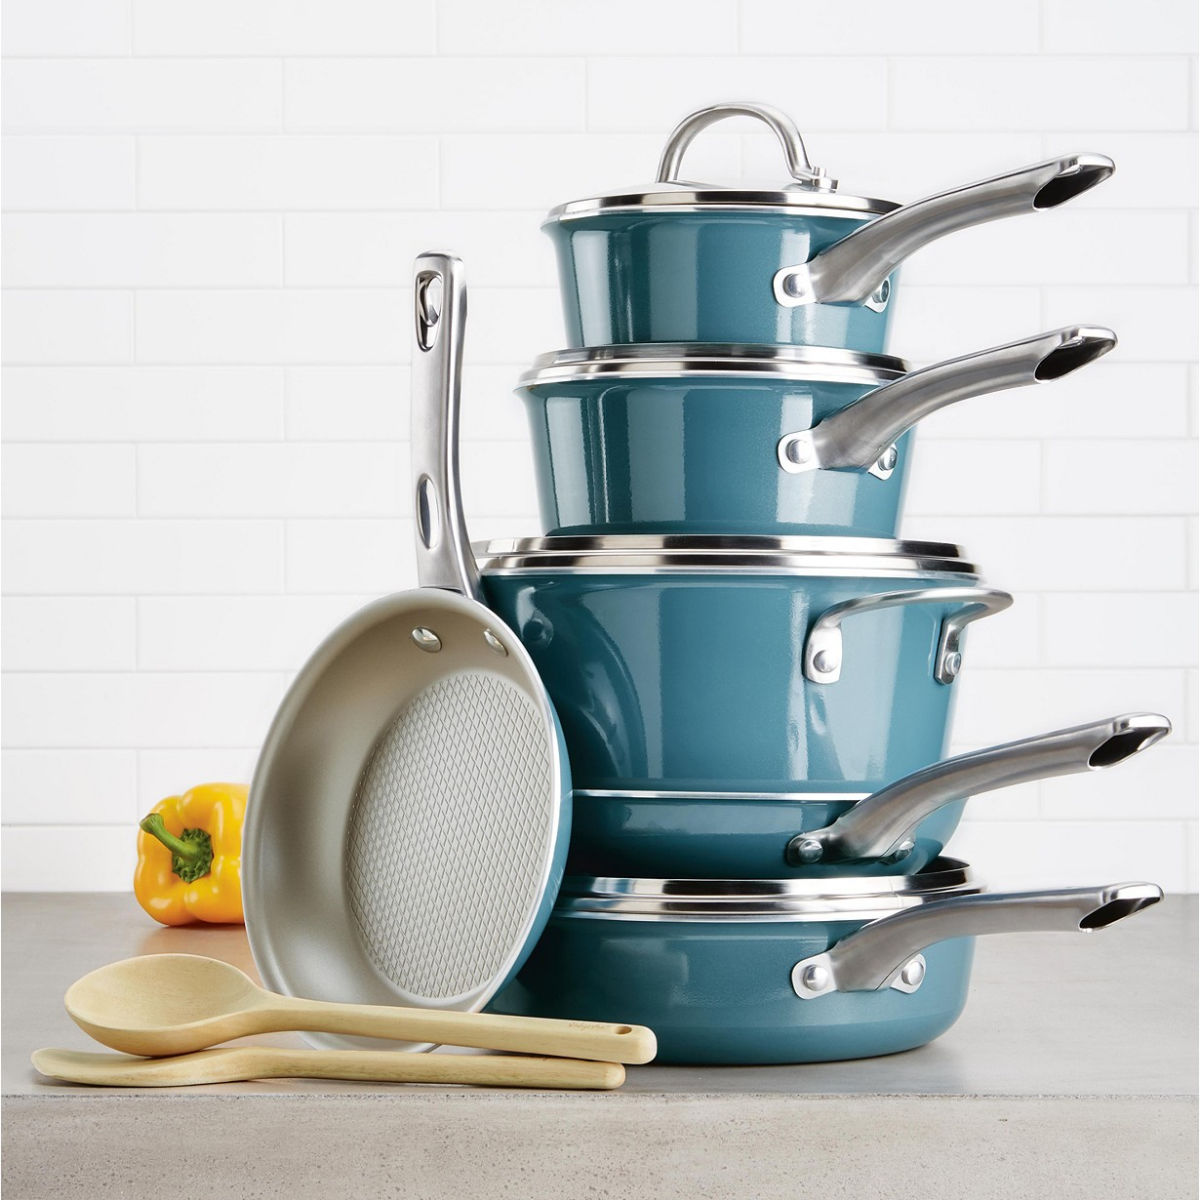 Ayesha Curry Home Collection 12pc Porcelain Enamel Non-Stick Cookware Set